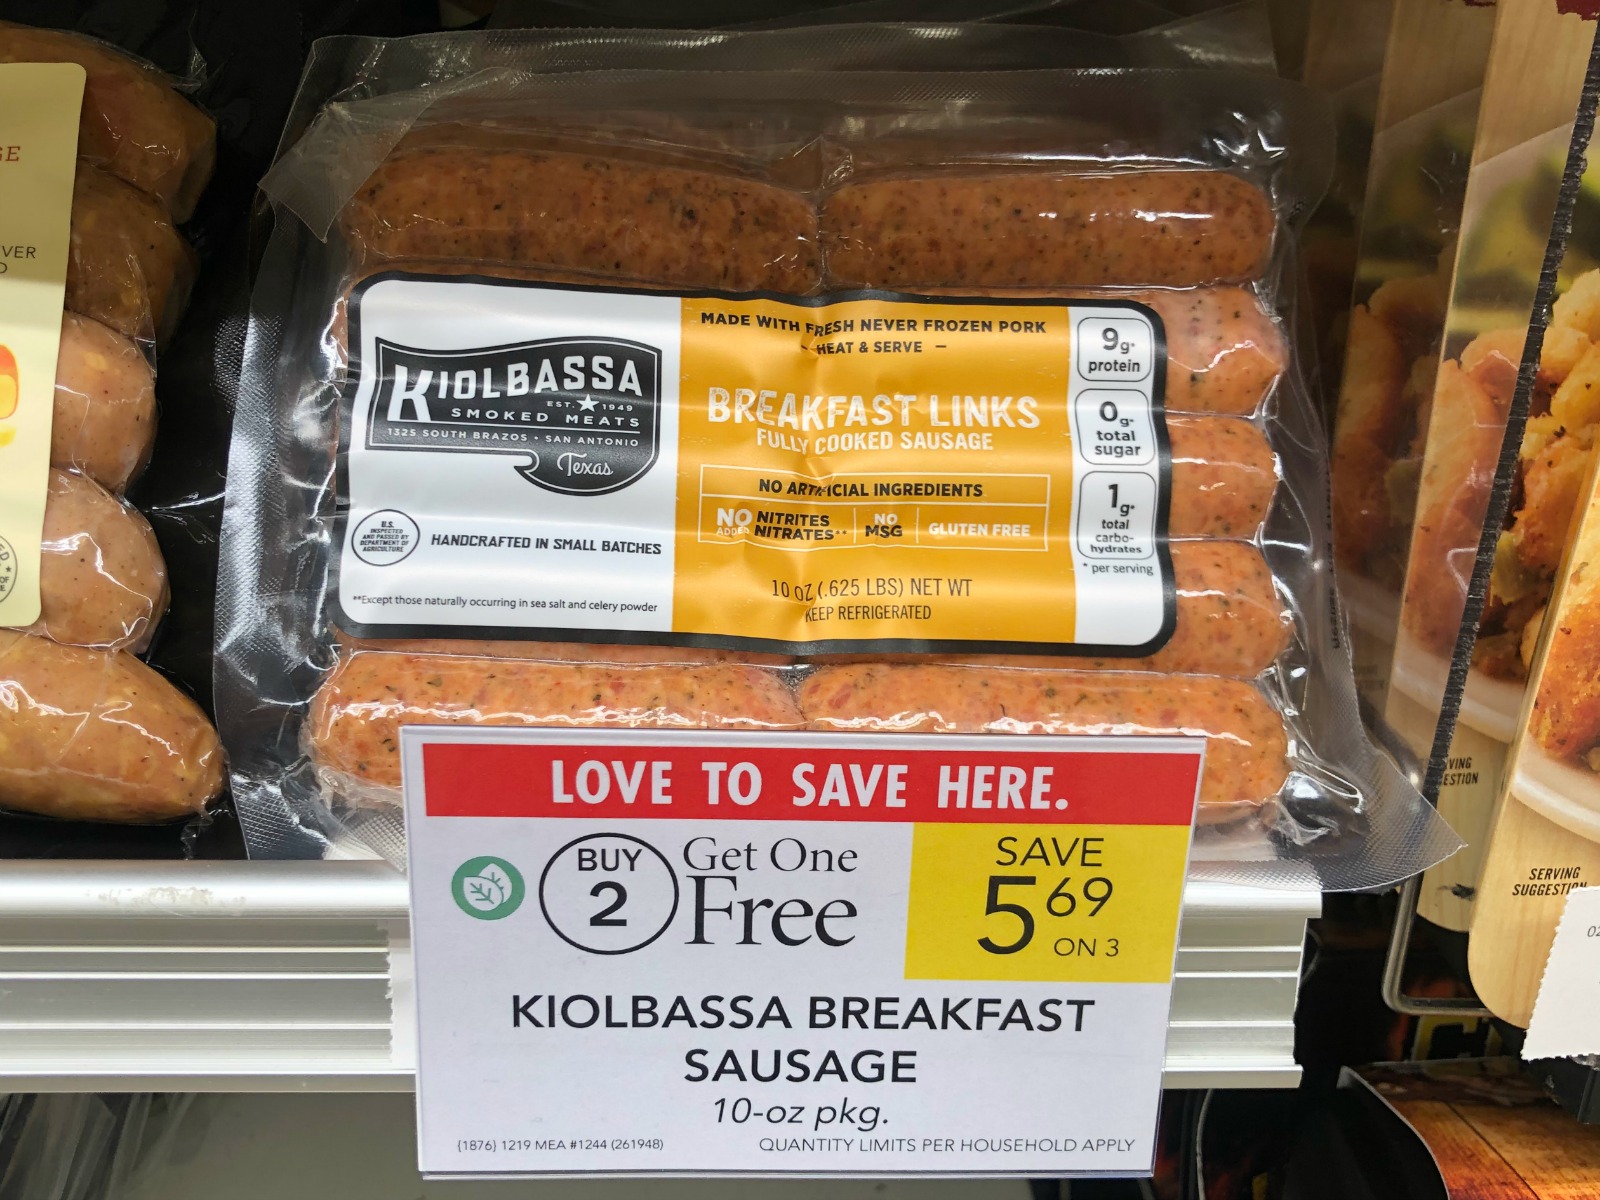 Time To Stock Up On Kiolbassa Breakfast Links - Buy Two, Get One FREE At Publix on I Heart Publix